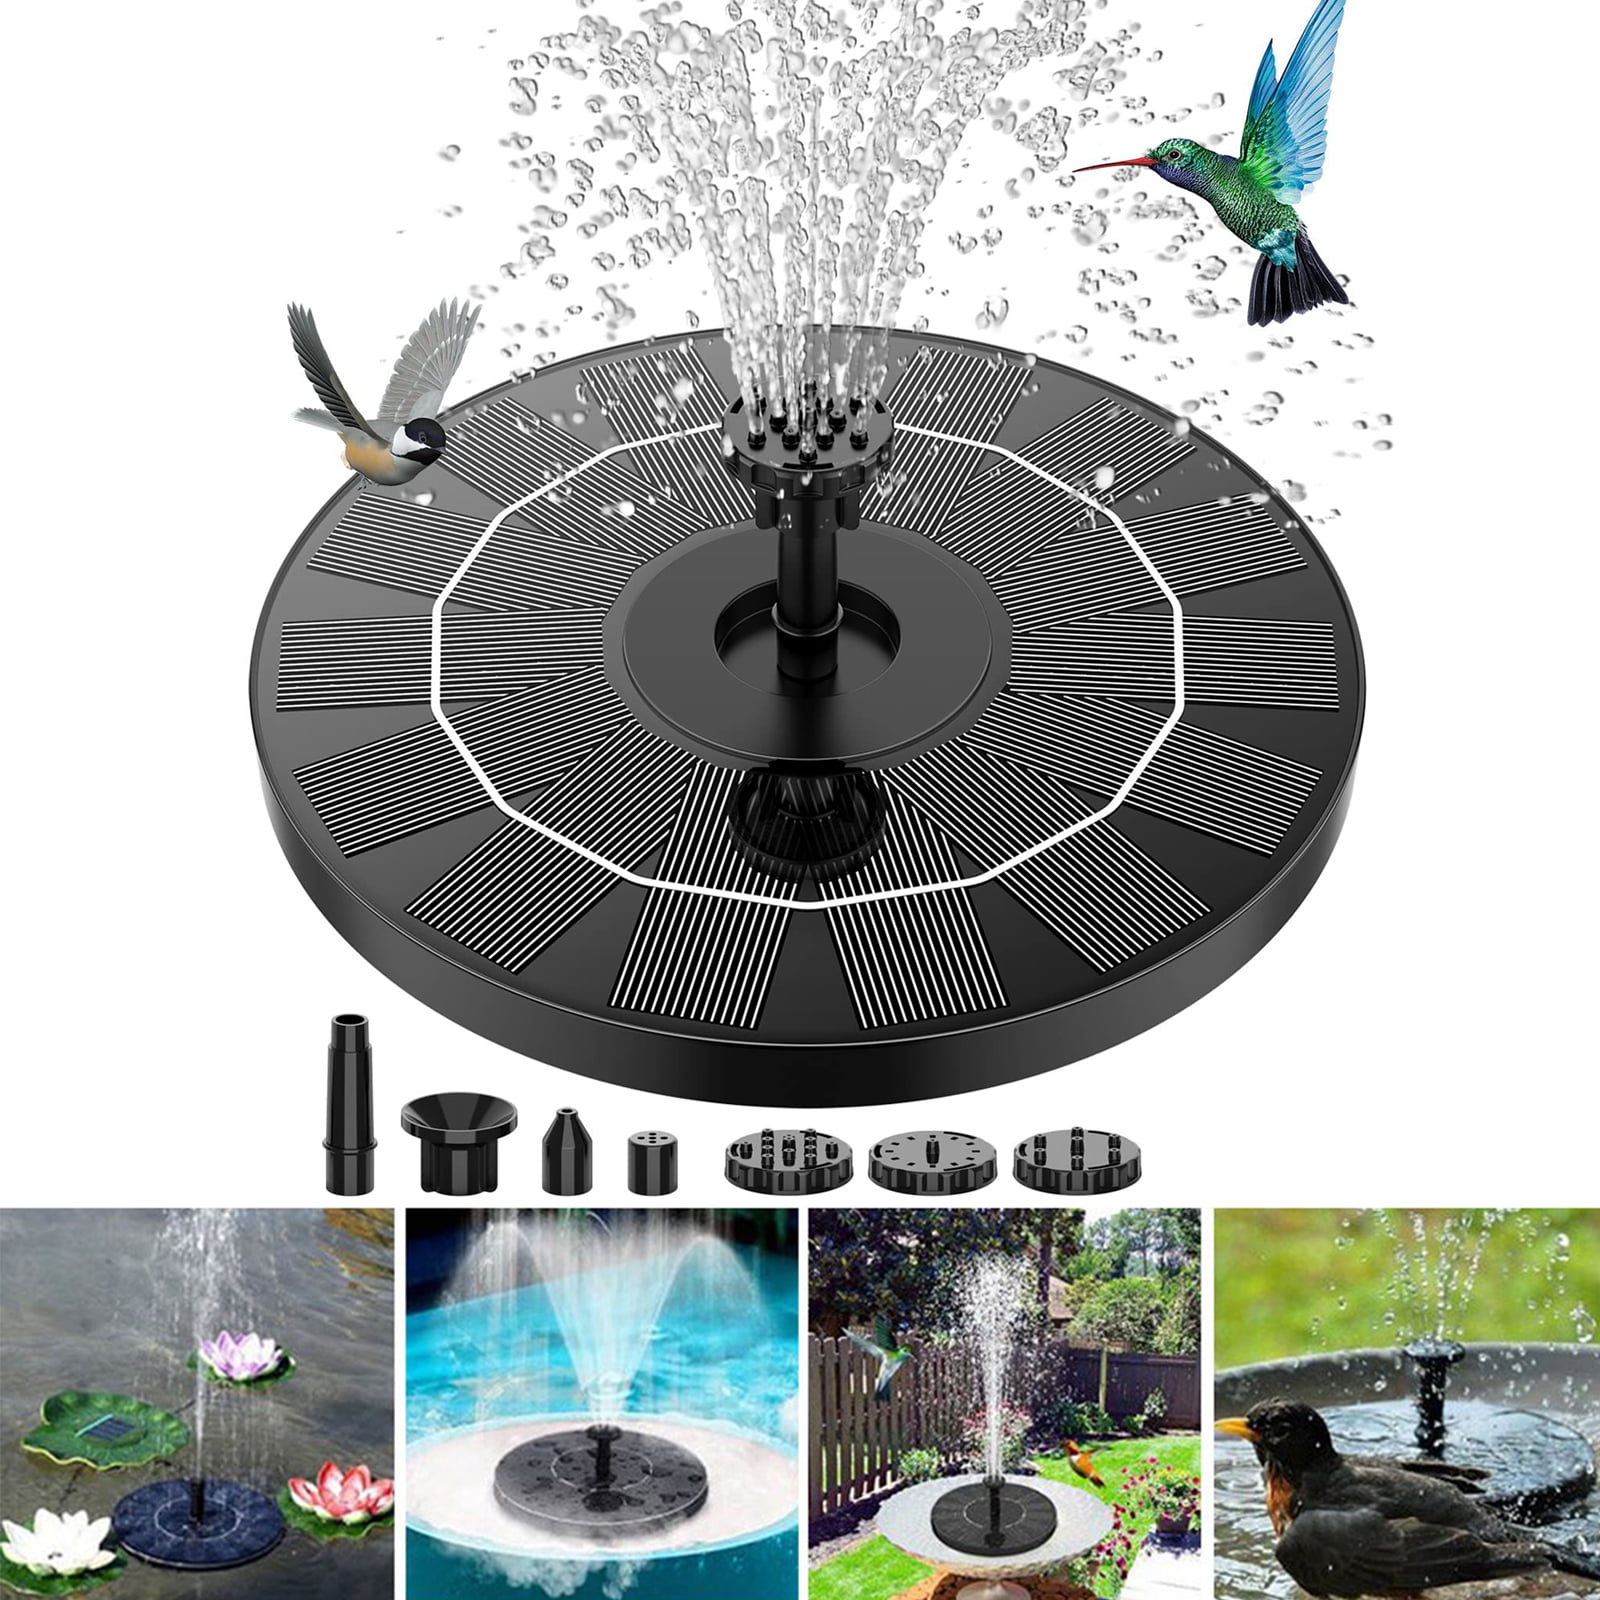 6 Nozzles Solar Panel Power Submersible Floating Fountain Pool Pond Water Pump 